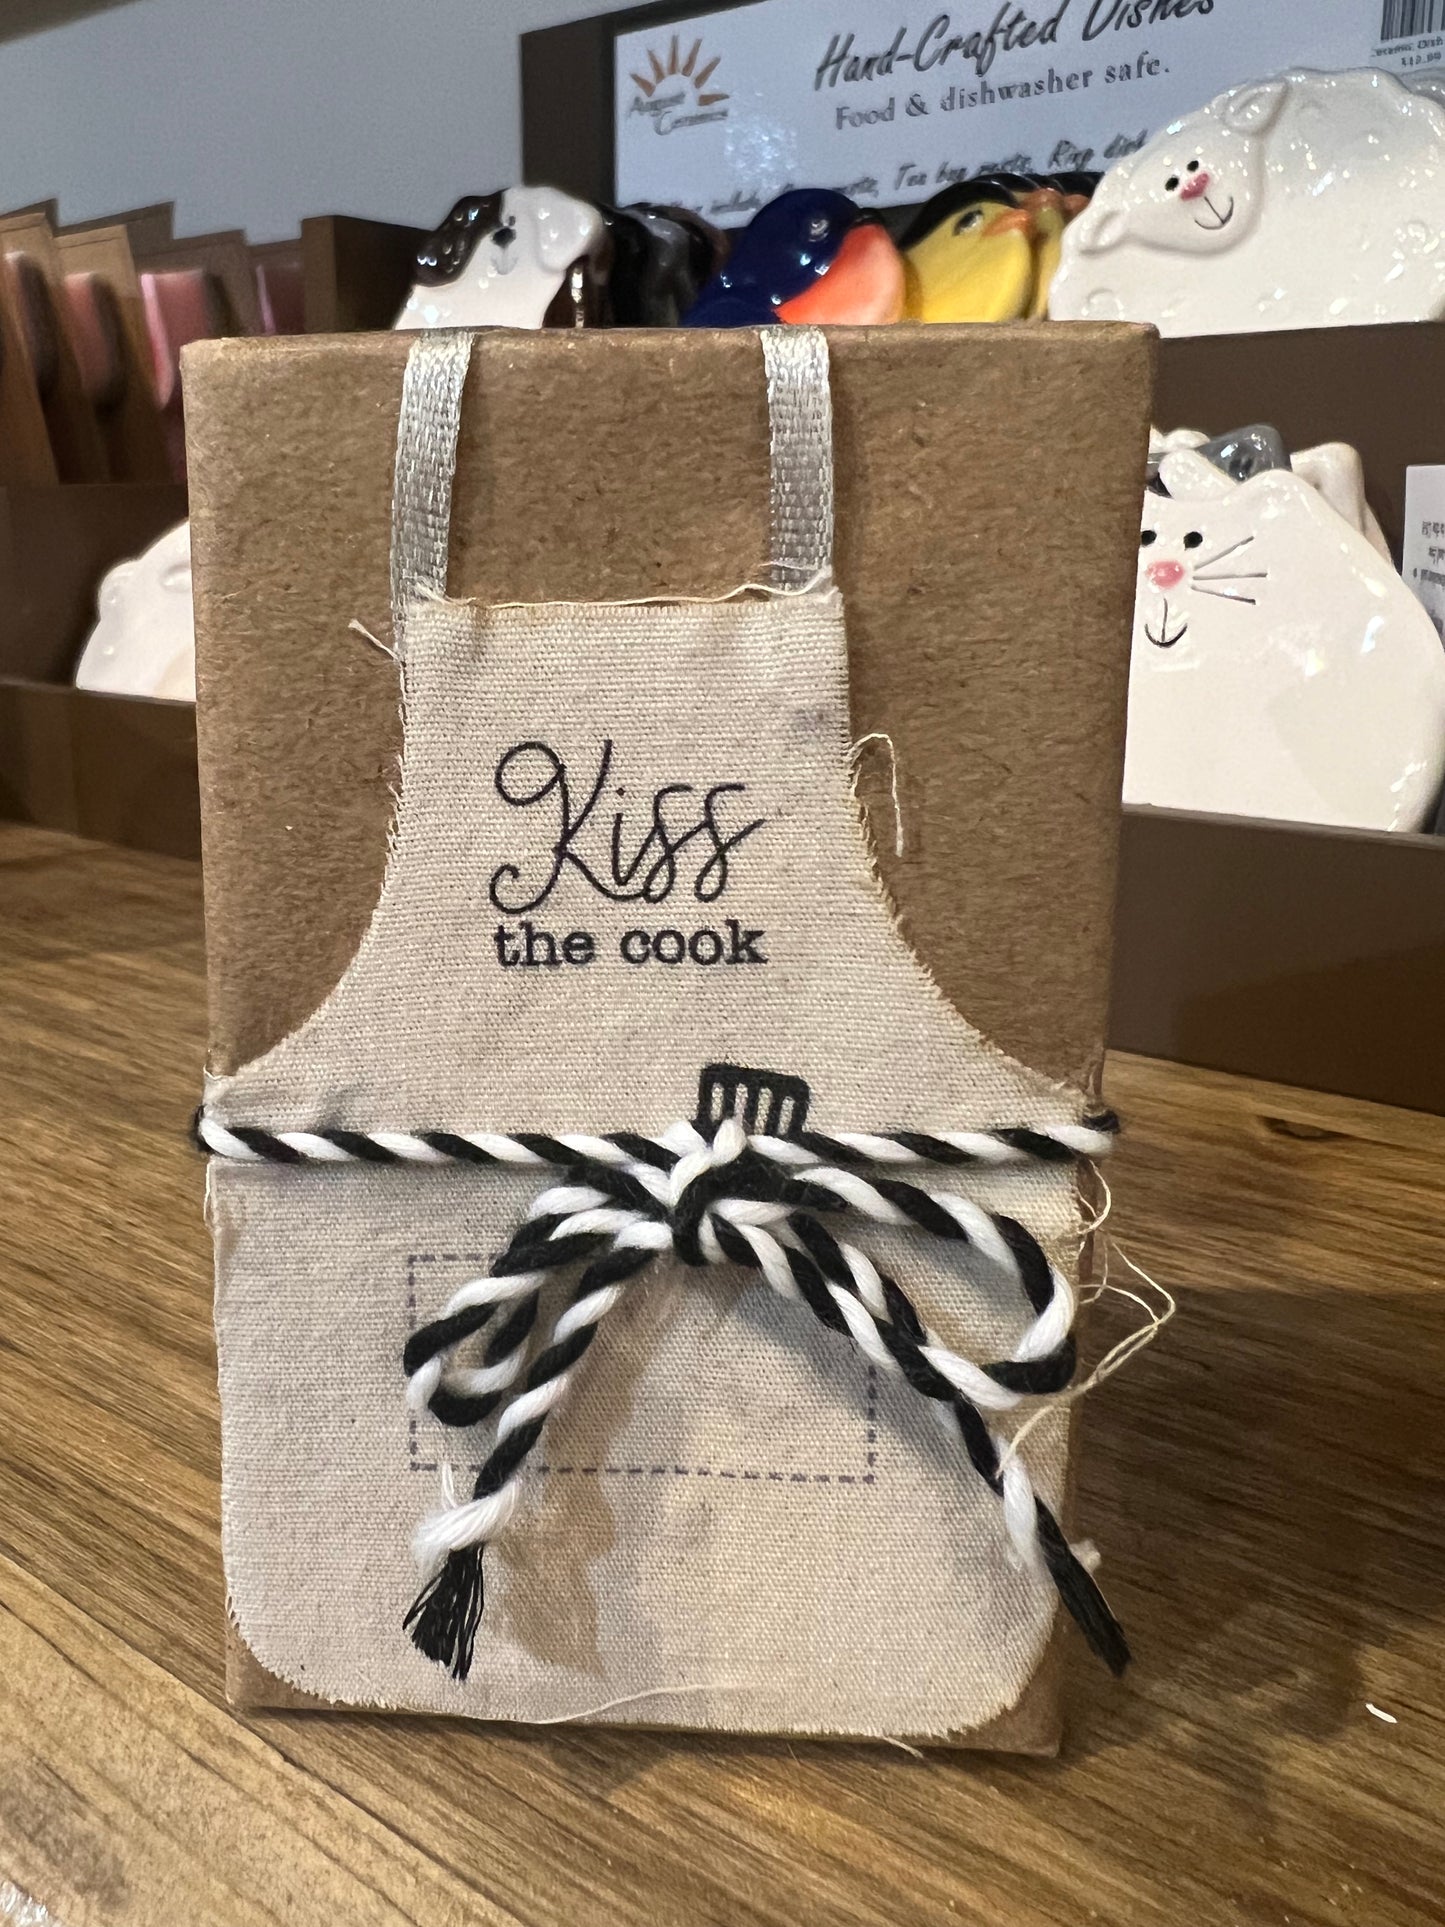 Vanilla Scented Soap Bar with an apron that displays "Kiss the cook".